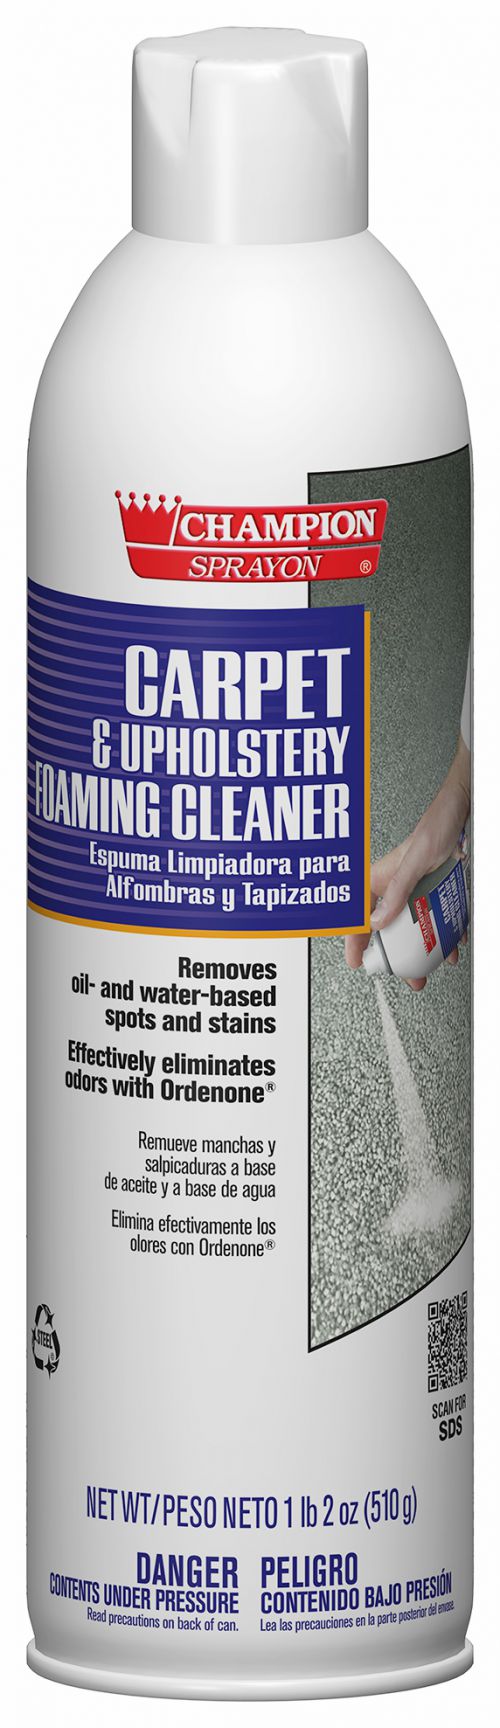 Chase Carpet & Upholstery Foaming Cleaner Pack 12/18oz